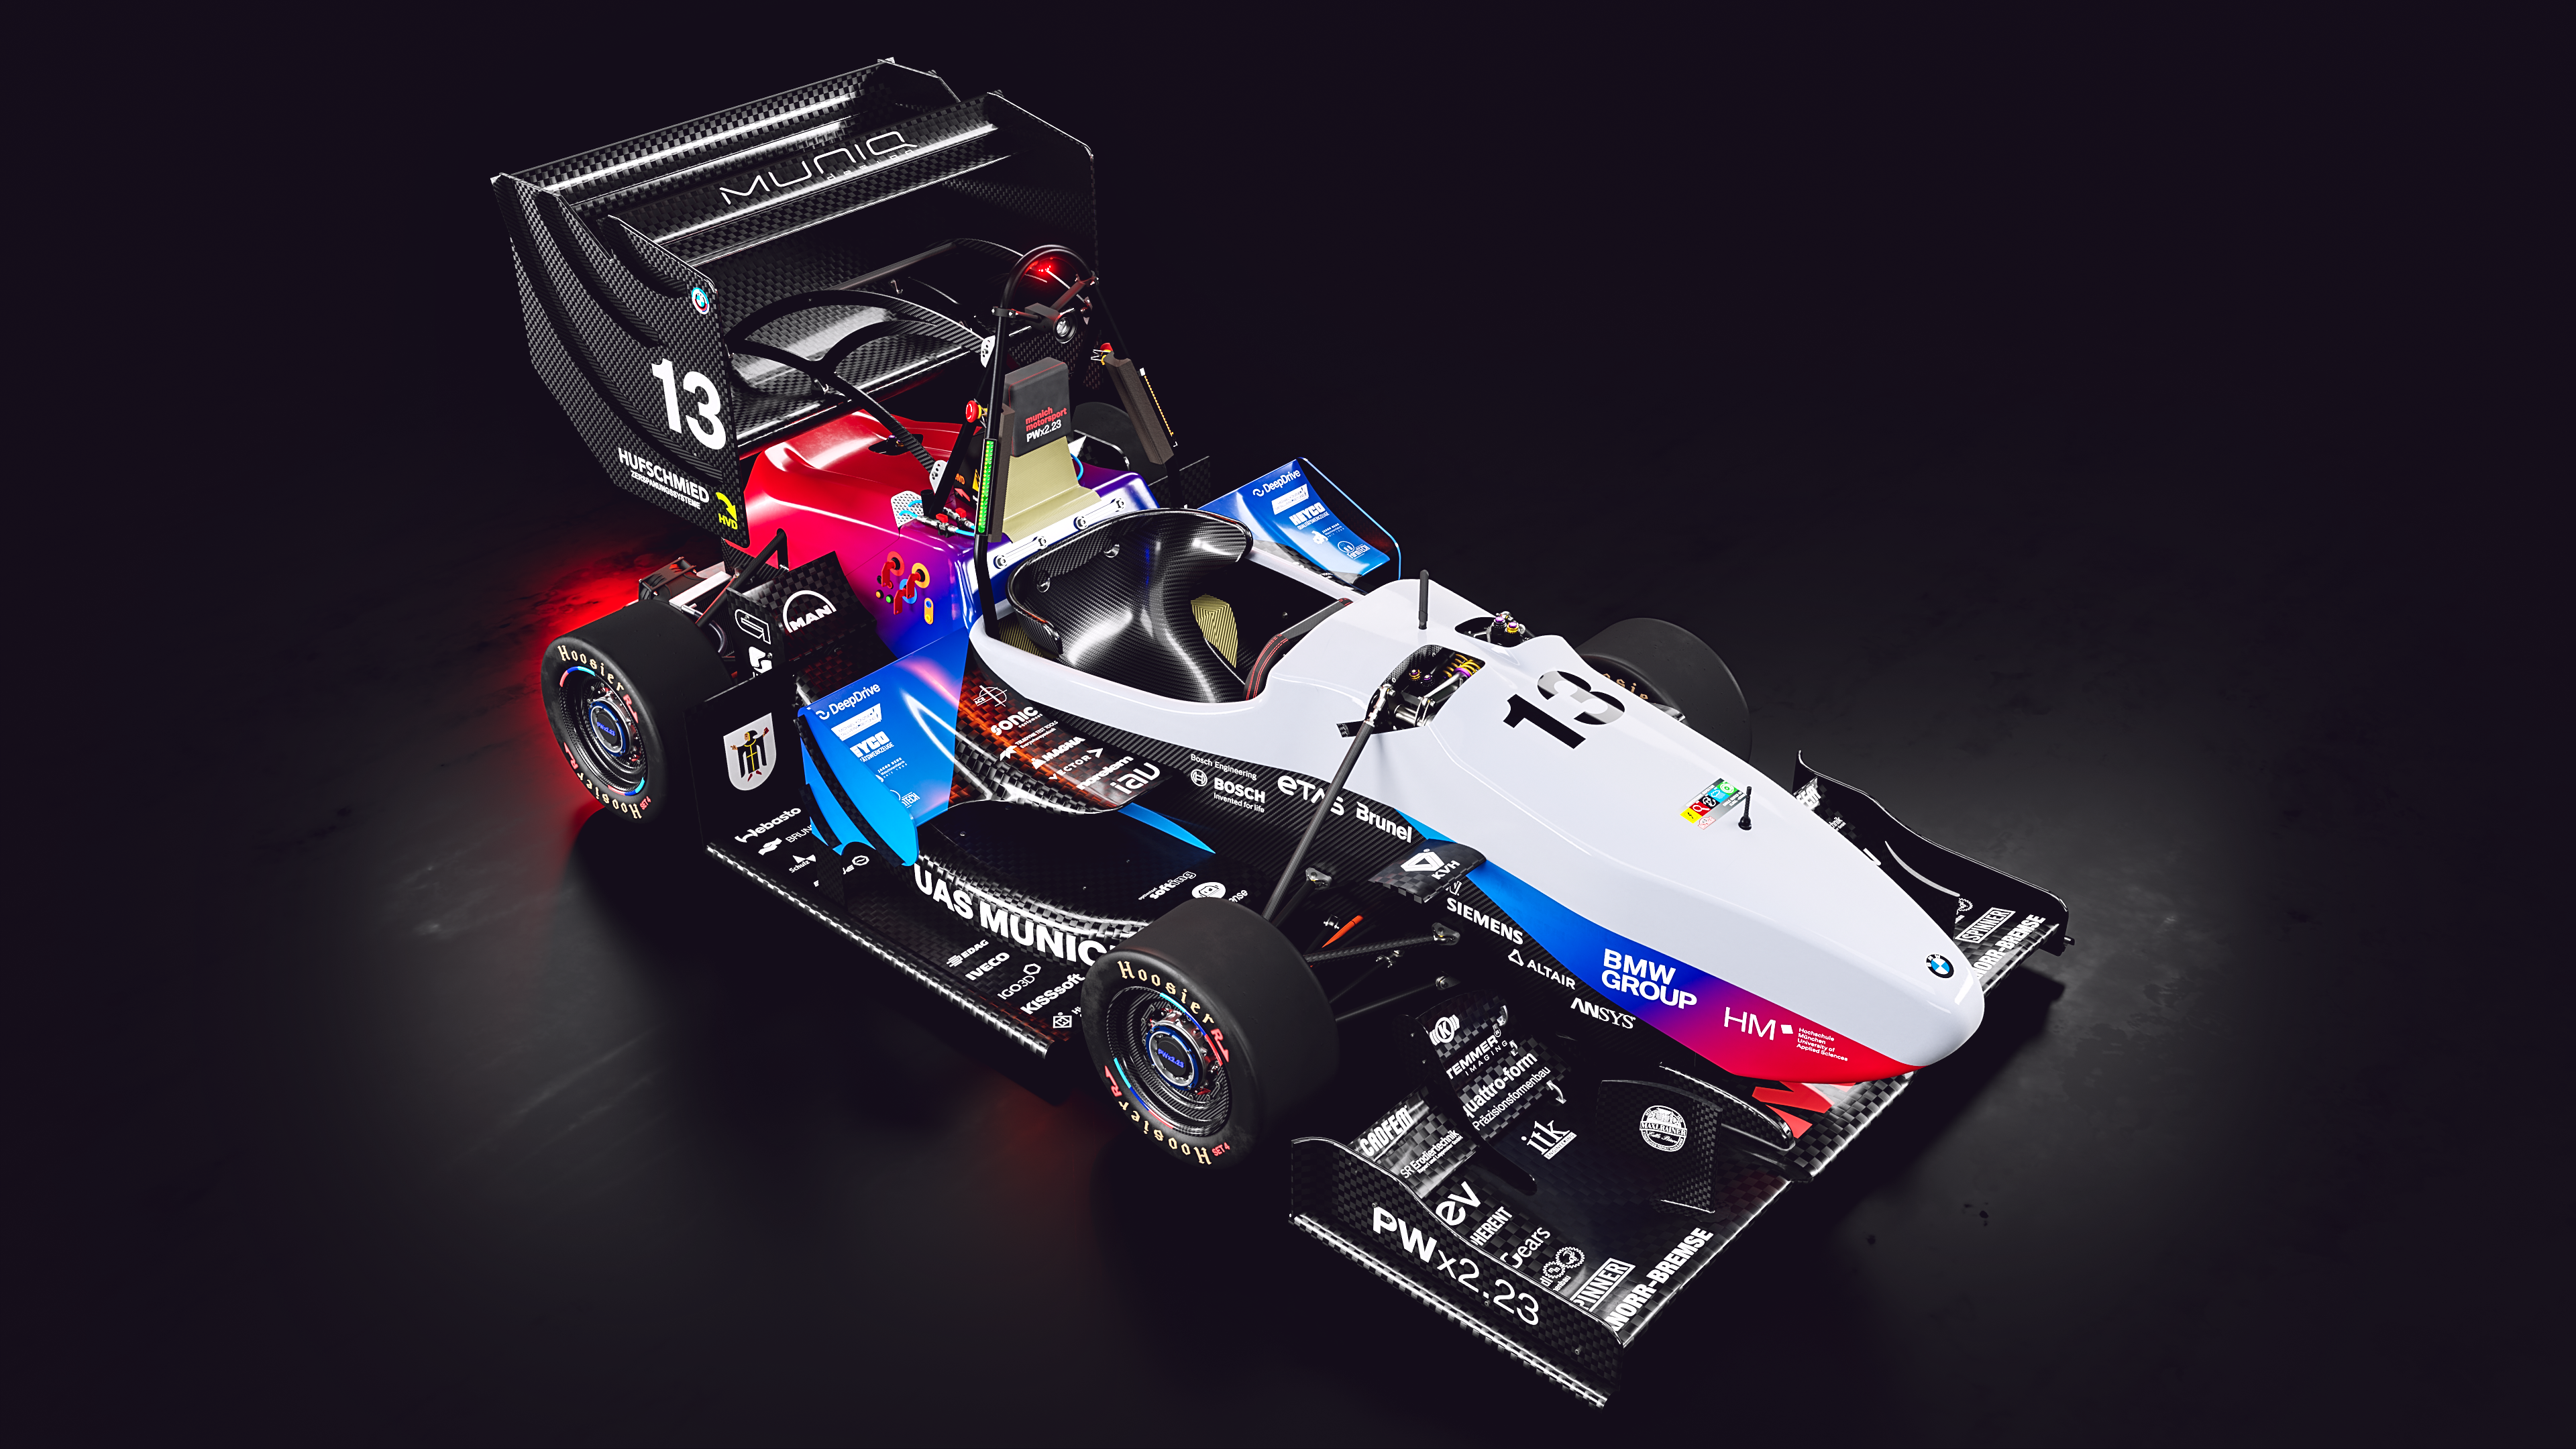 New car of the Formula Student team at the Hochschule Munich